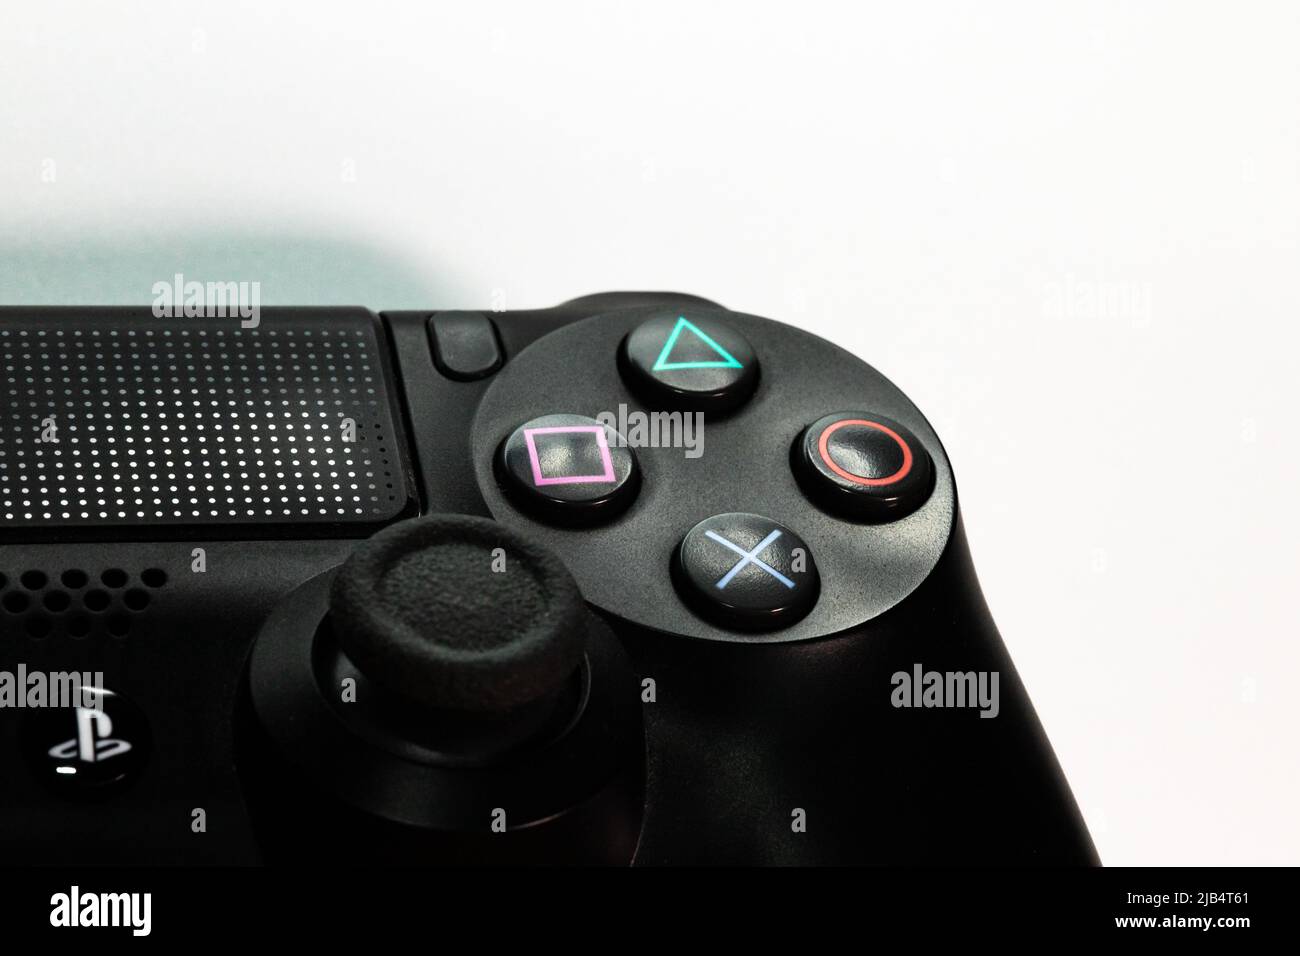 Ps4 controller hi-res stock photography and images - Alamy